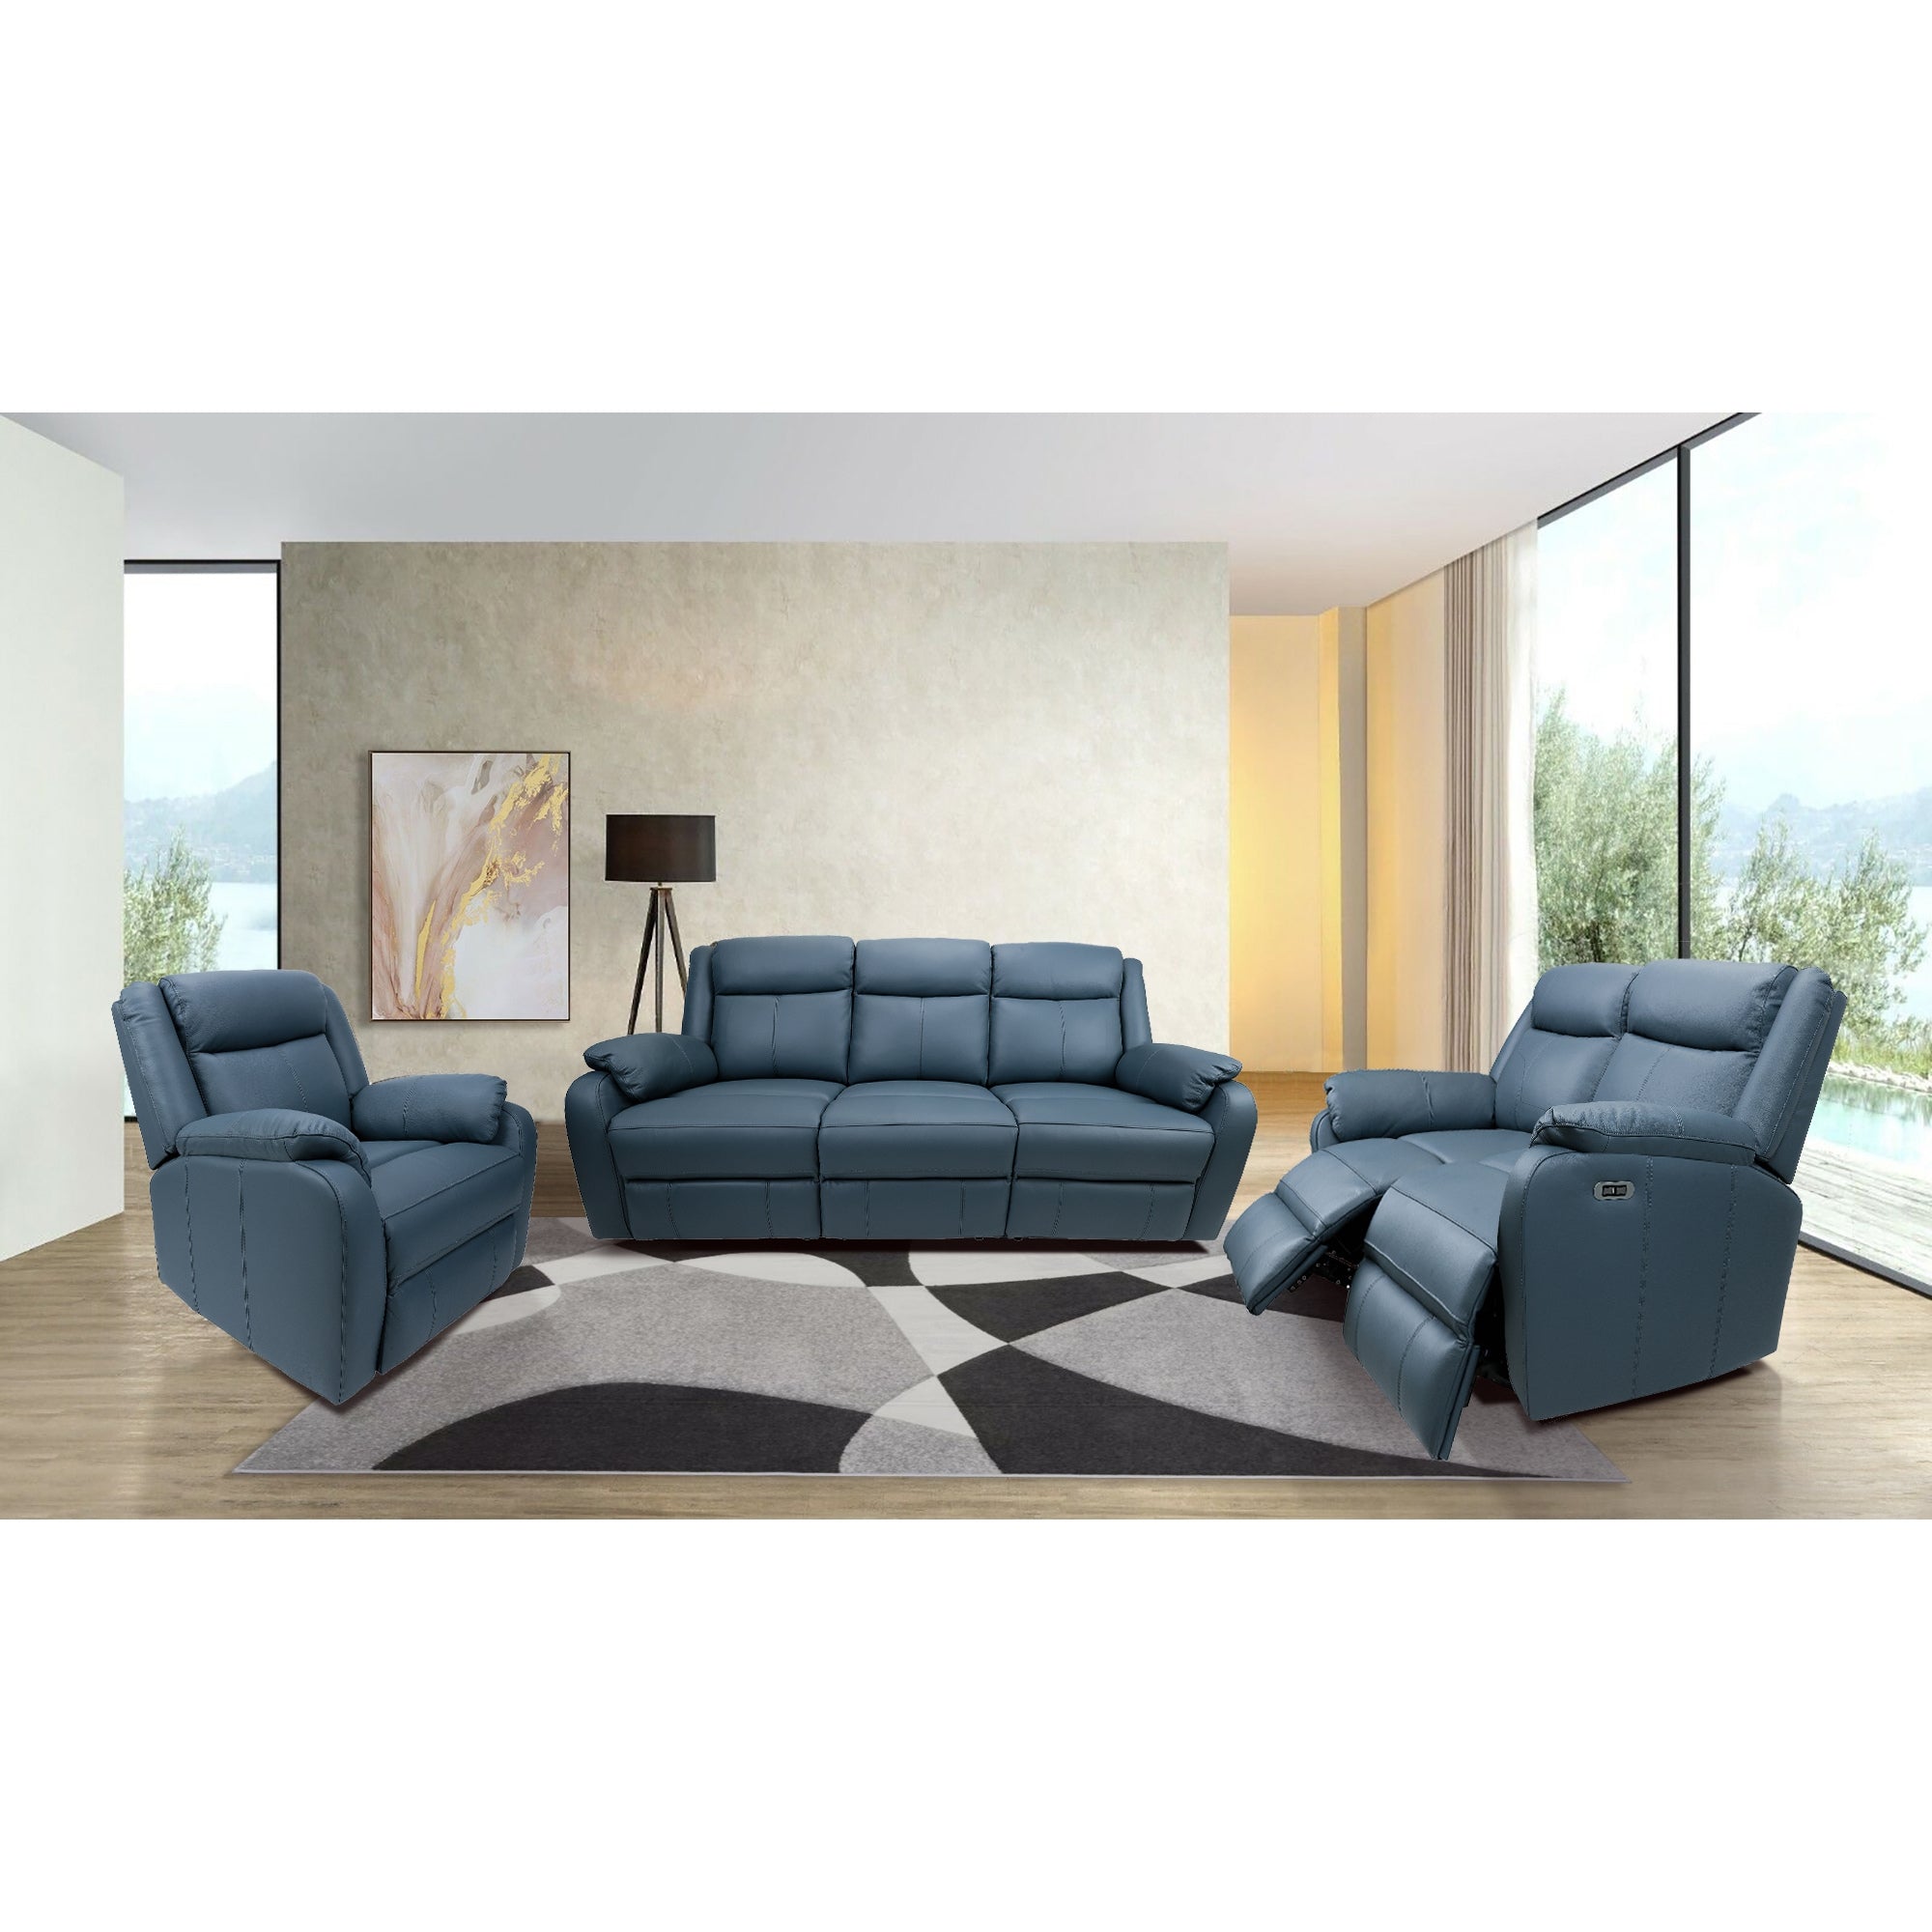 Blue 3-Seater Electric Recliner Leather Lounge w/ USB Charger